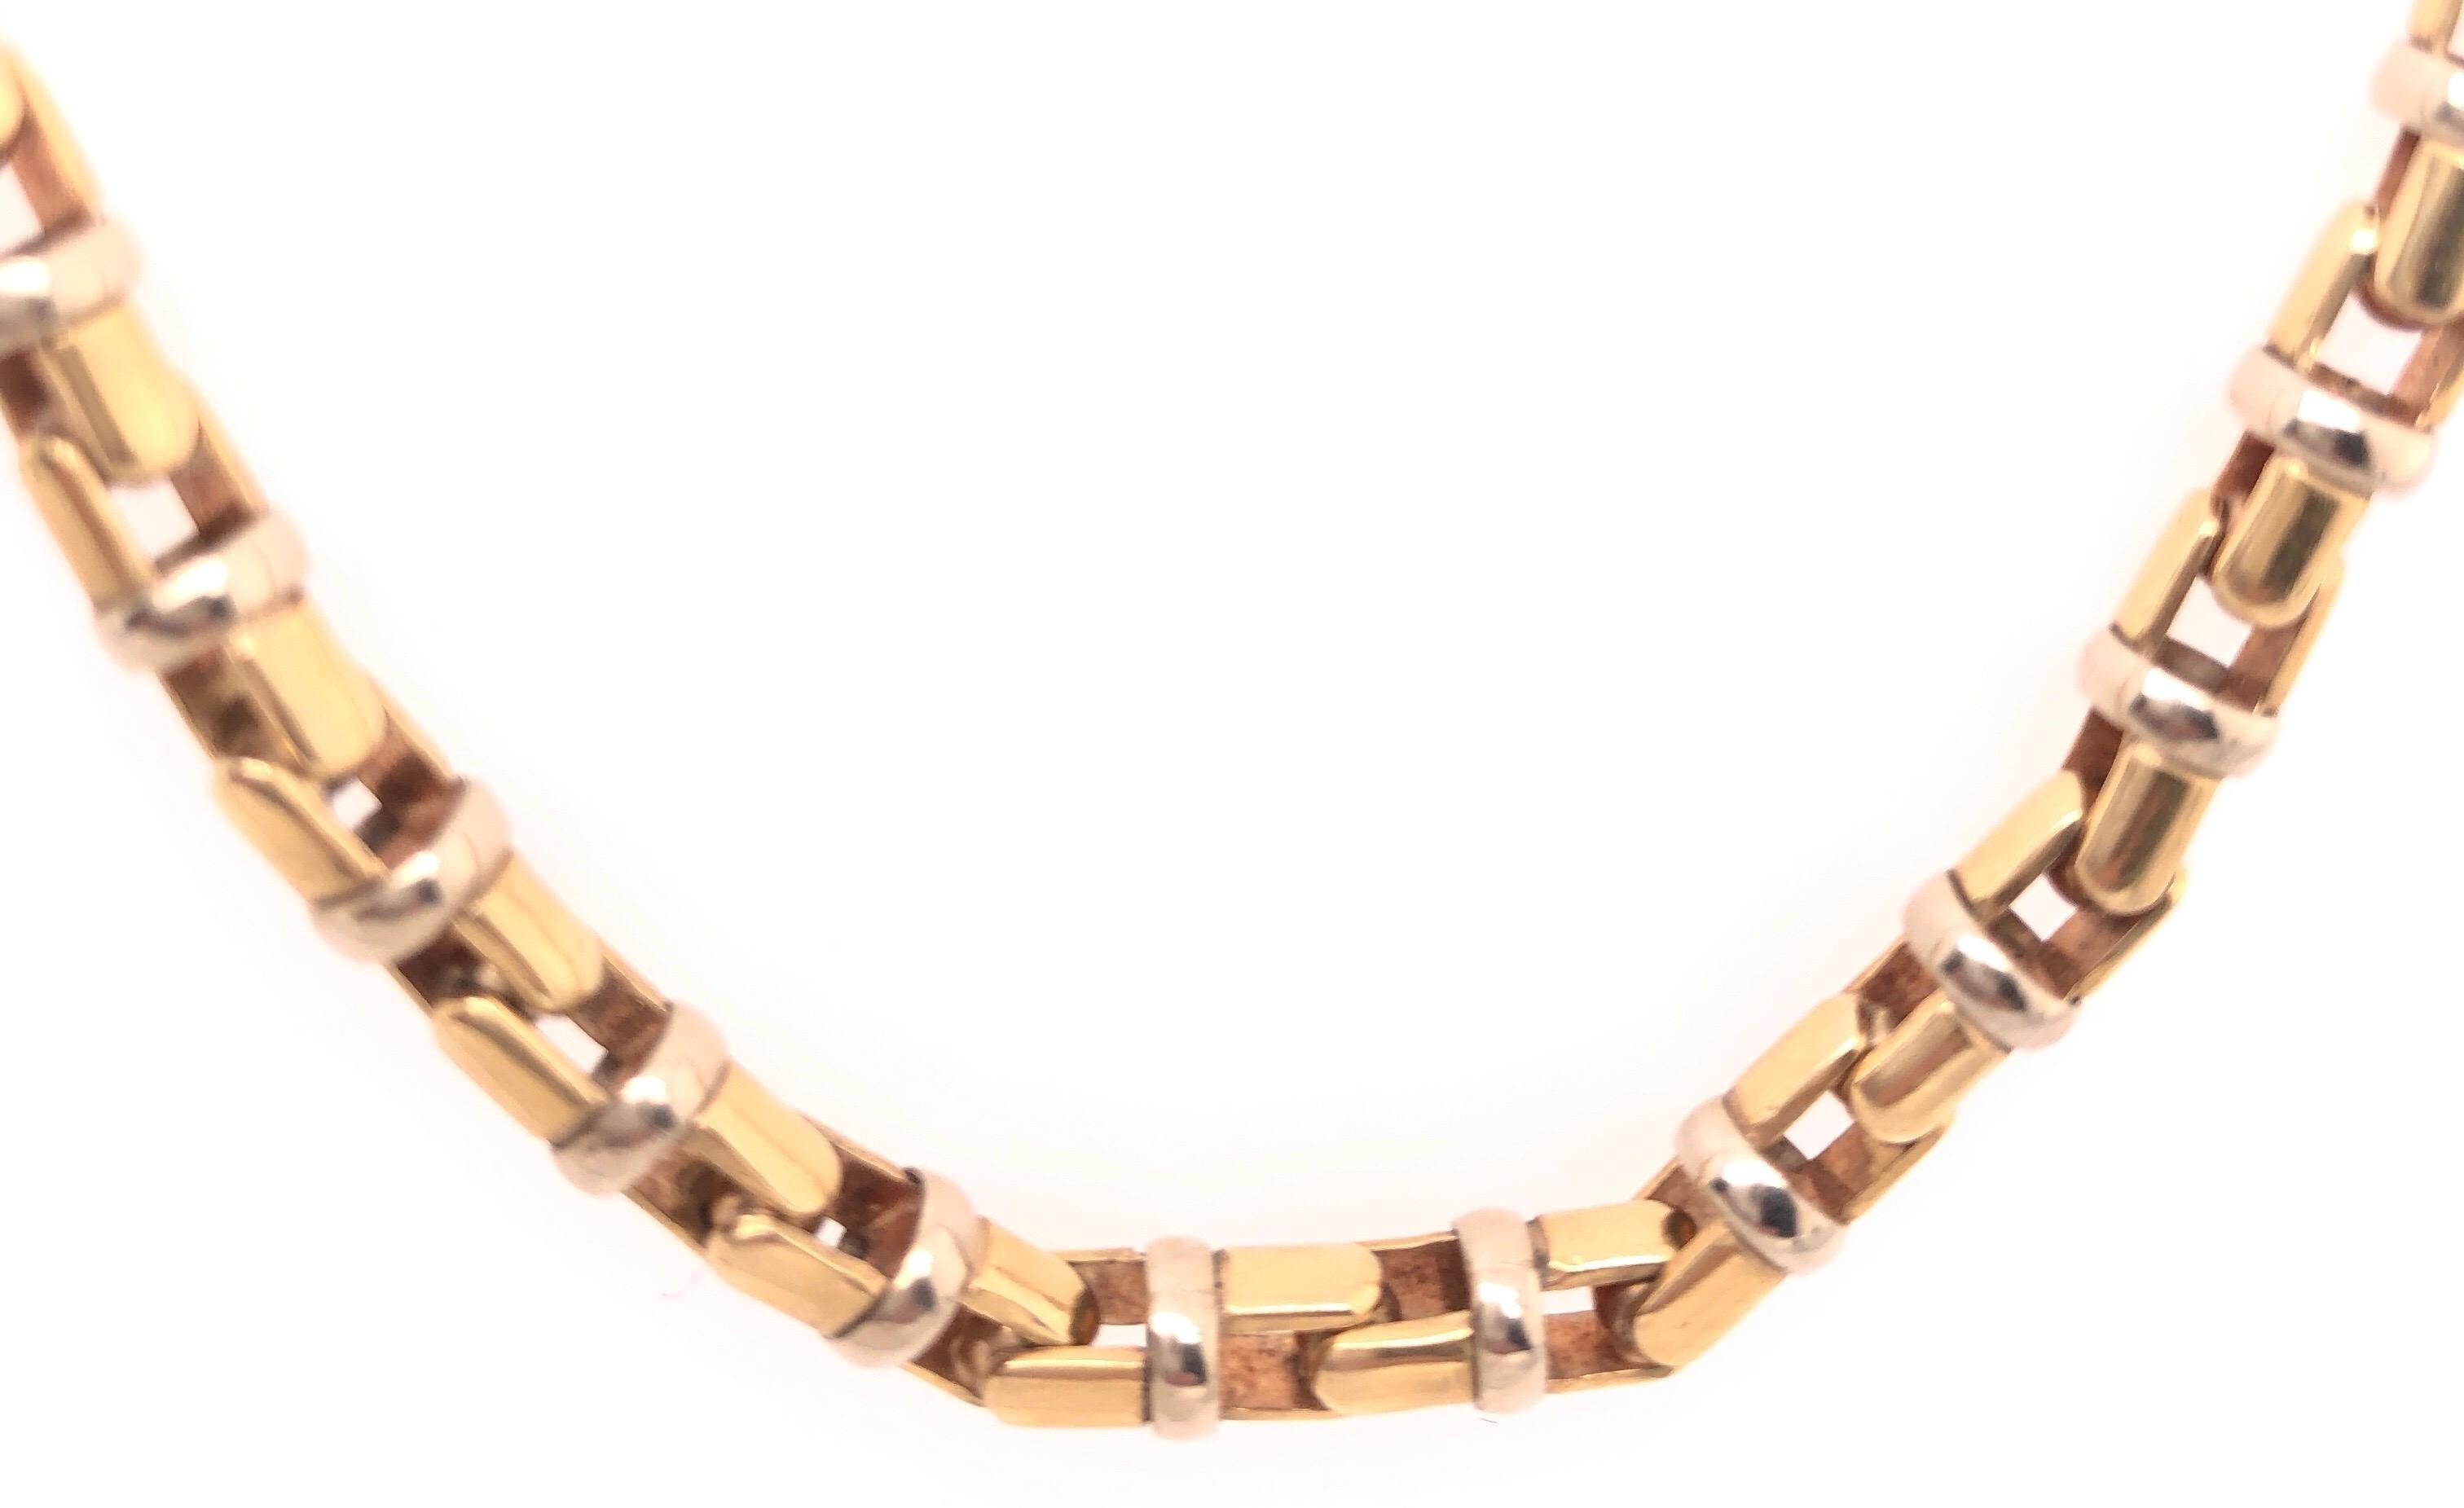 14 Karat Yellow and White Gold 22.5 Inch Baraka Brev Luxury Heavy Link Necklace.
Marked Baraka Brev, with a crab clasp. This item has a current day, May 1, 2020 scrap value of almost $4600.
48.7 grams total weight.

